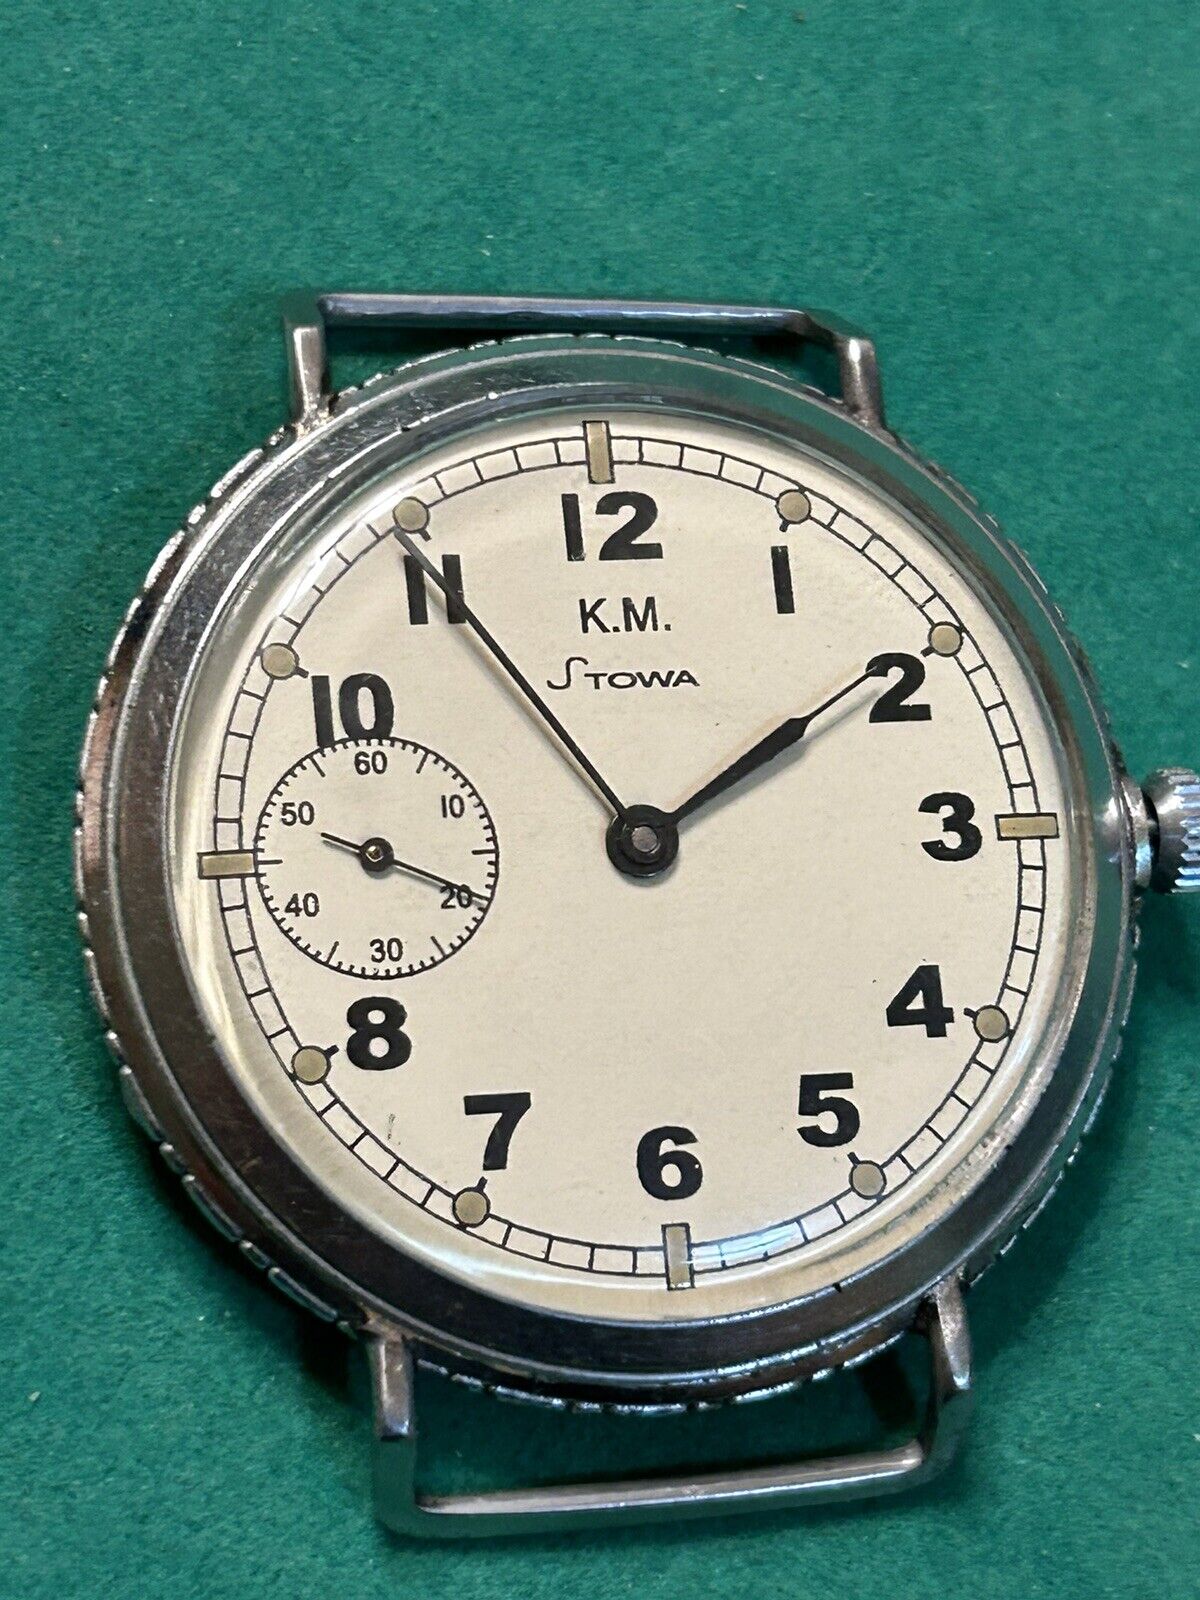 Vintage Stowa pocket watch conversion great condition 